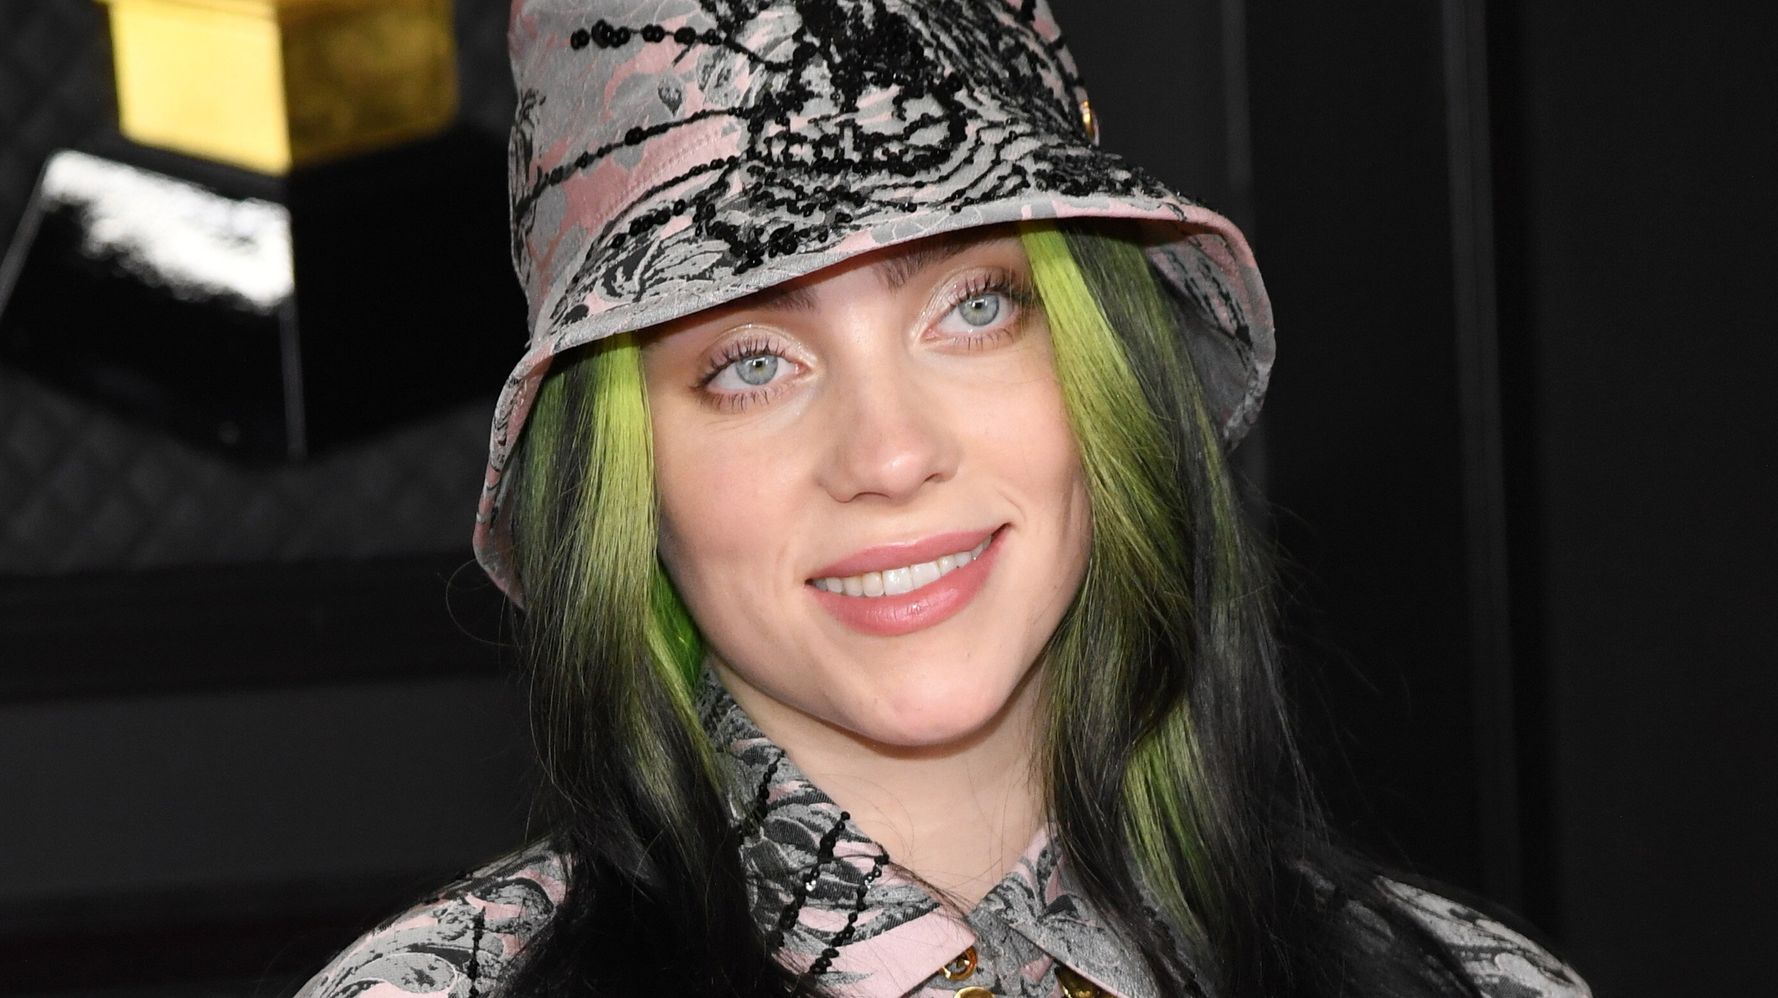 Billie Eilish is barely recognizable after revealing his platinum blonde hair